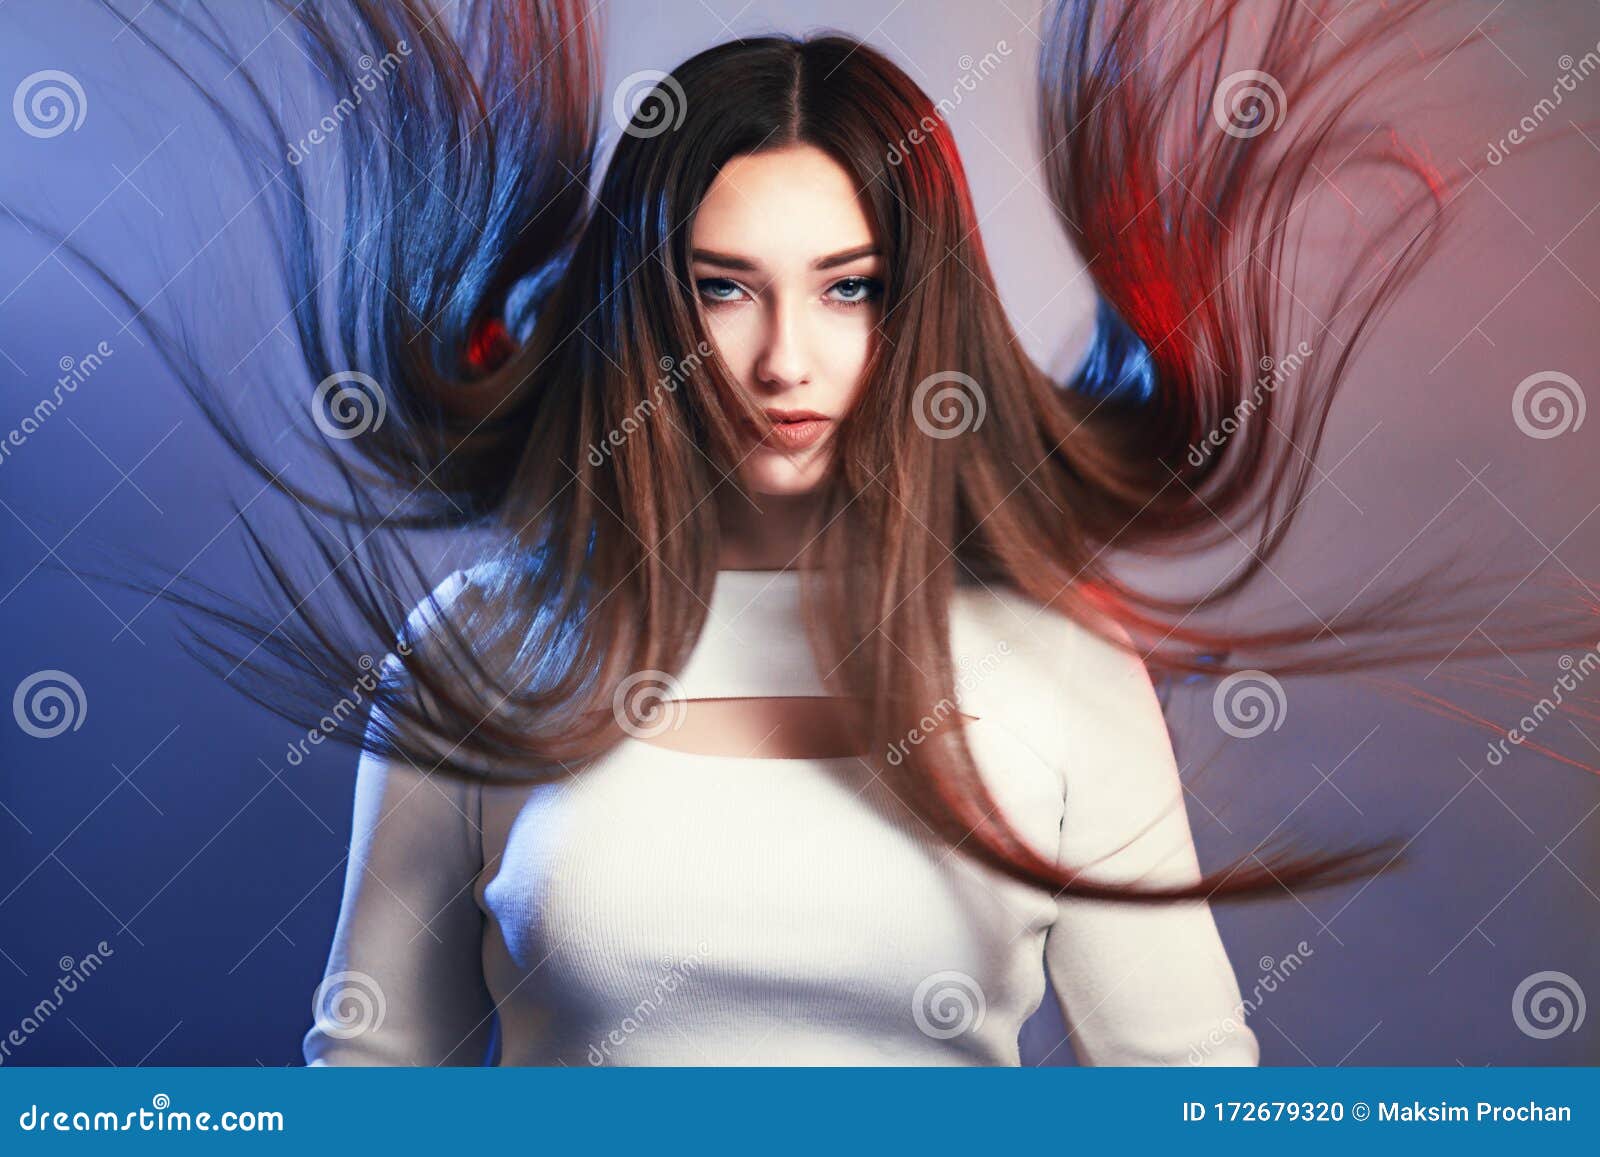 Portrait of Girl with Long Hair Flying in Air on Studio Background, Young  Woman Looking Straight Confidently , Fashion Model, Stock Photo - Image of  hair, insolence: 172679320